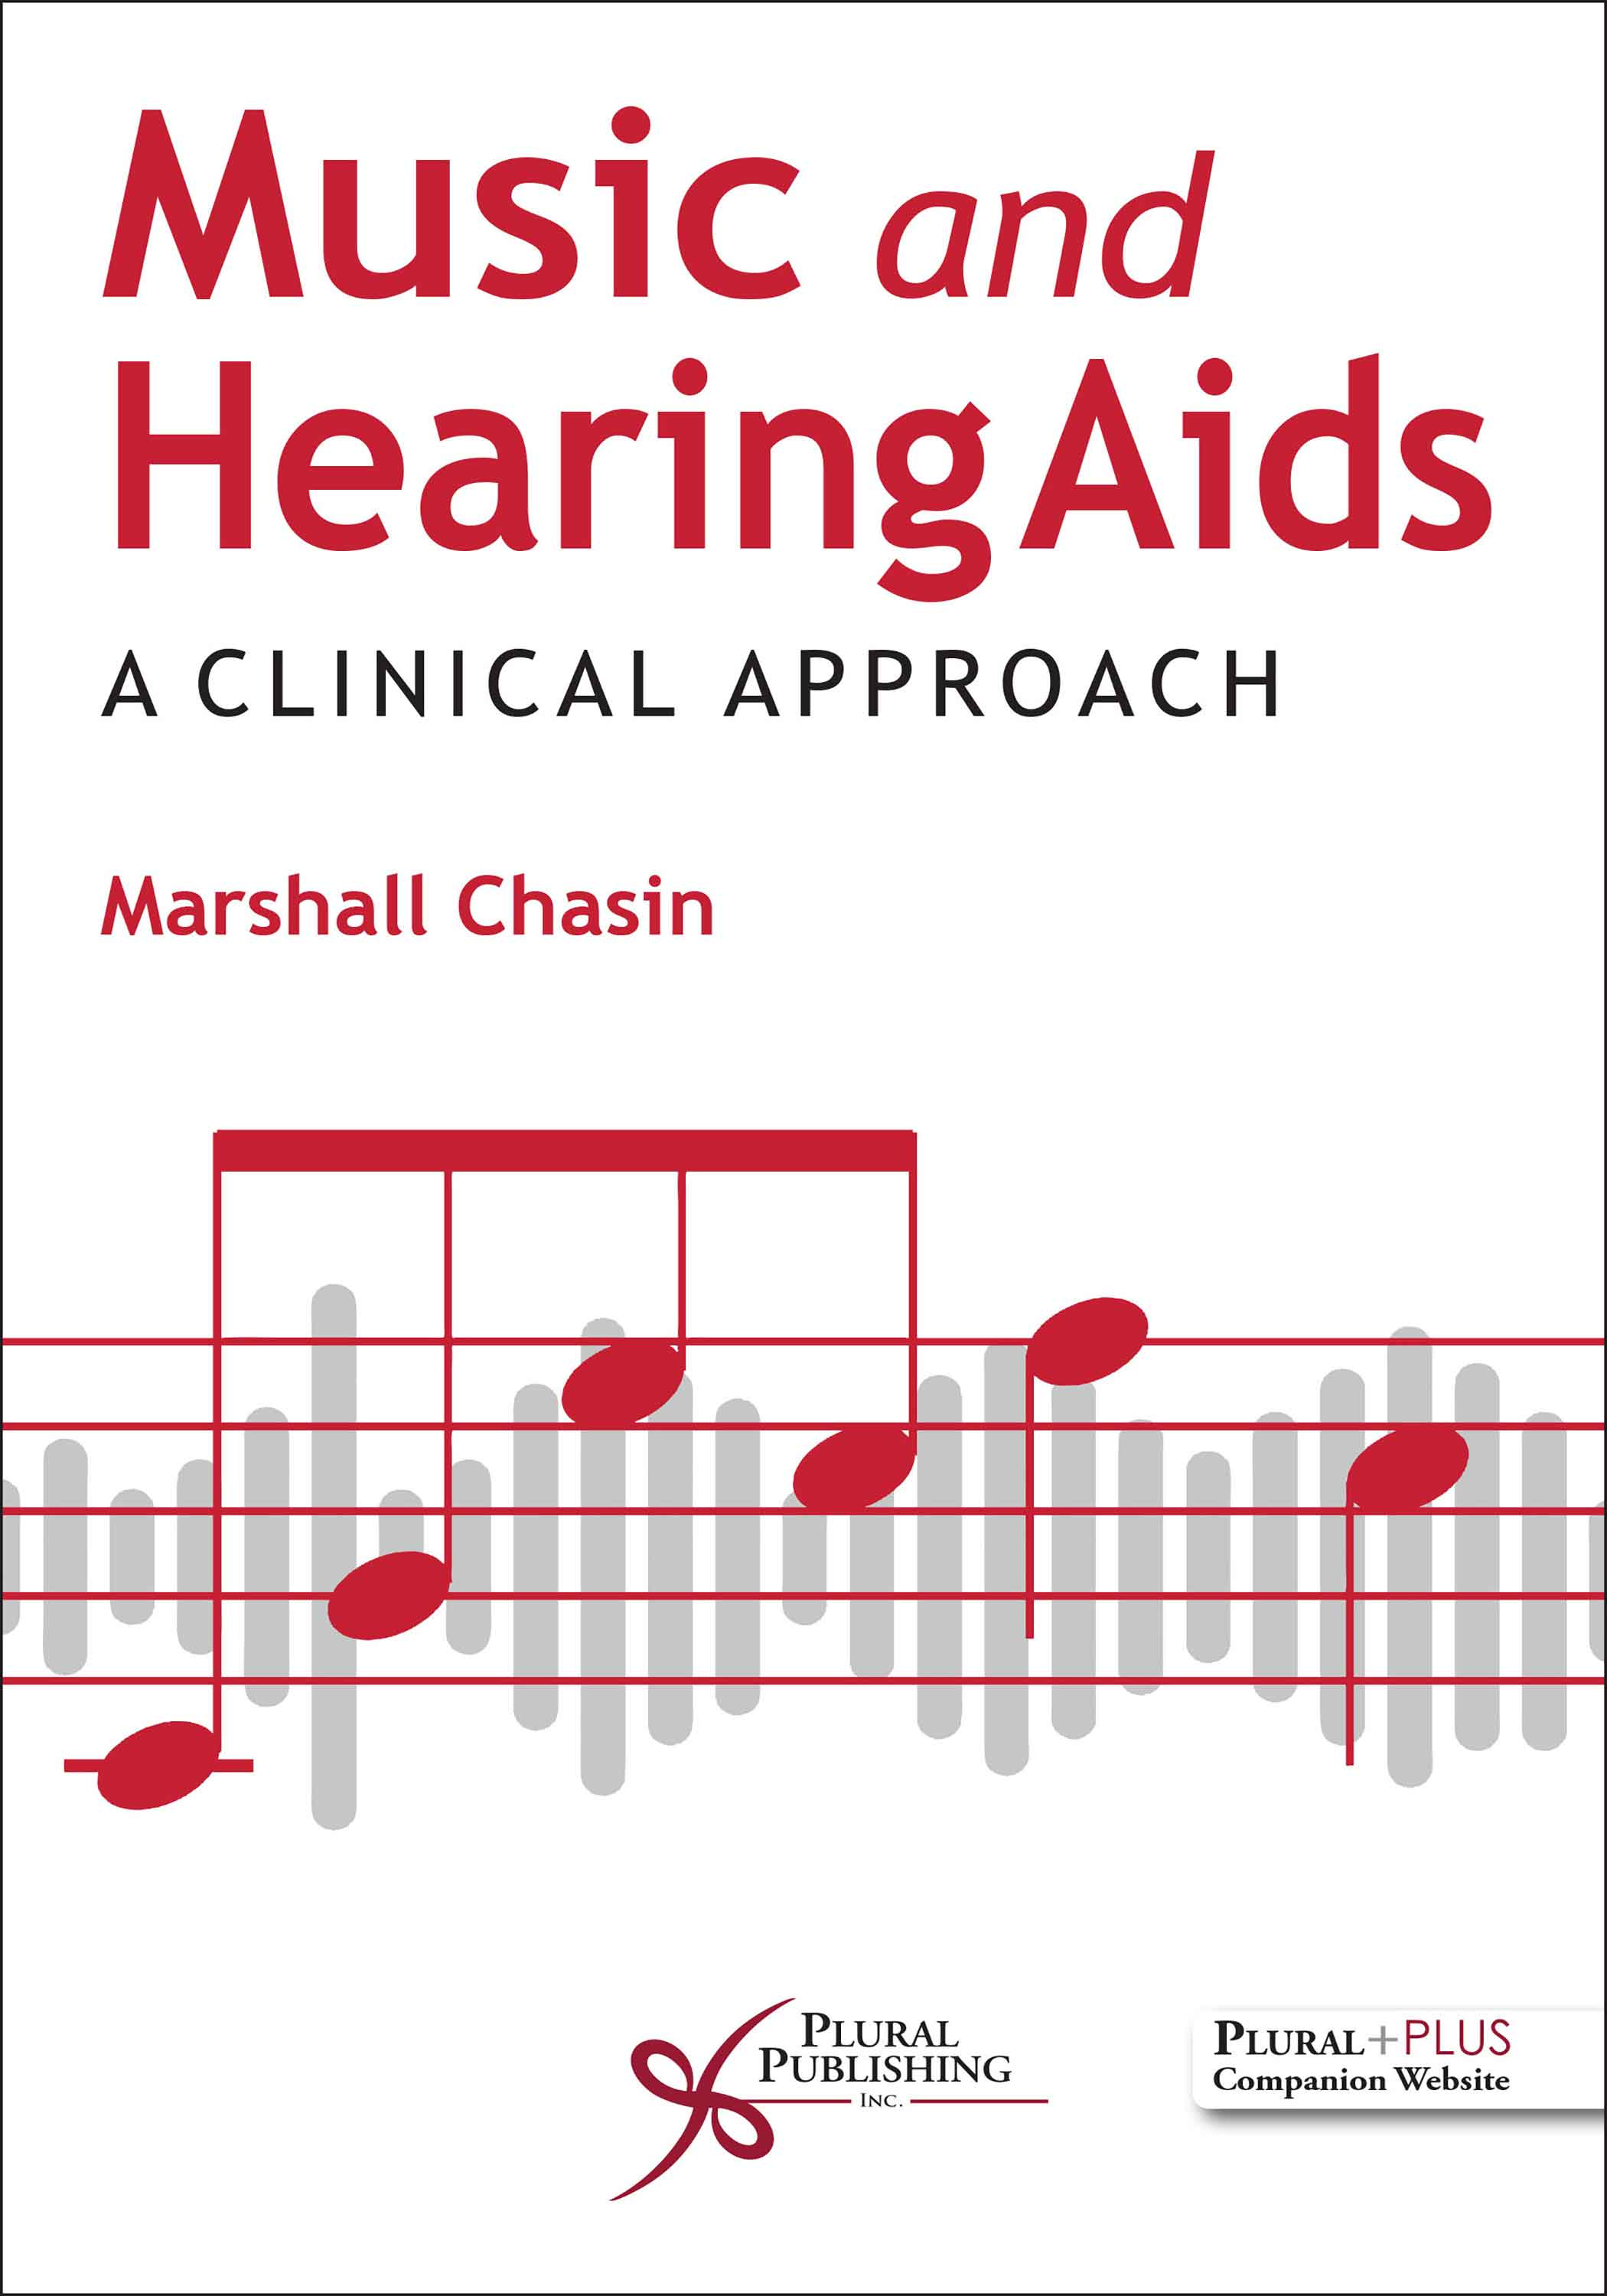 Music and Hearing Aids: A Clinical Approach